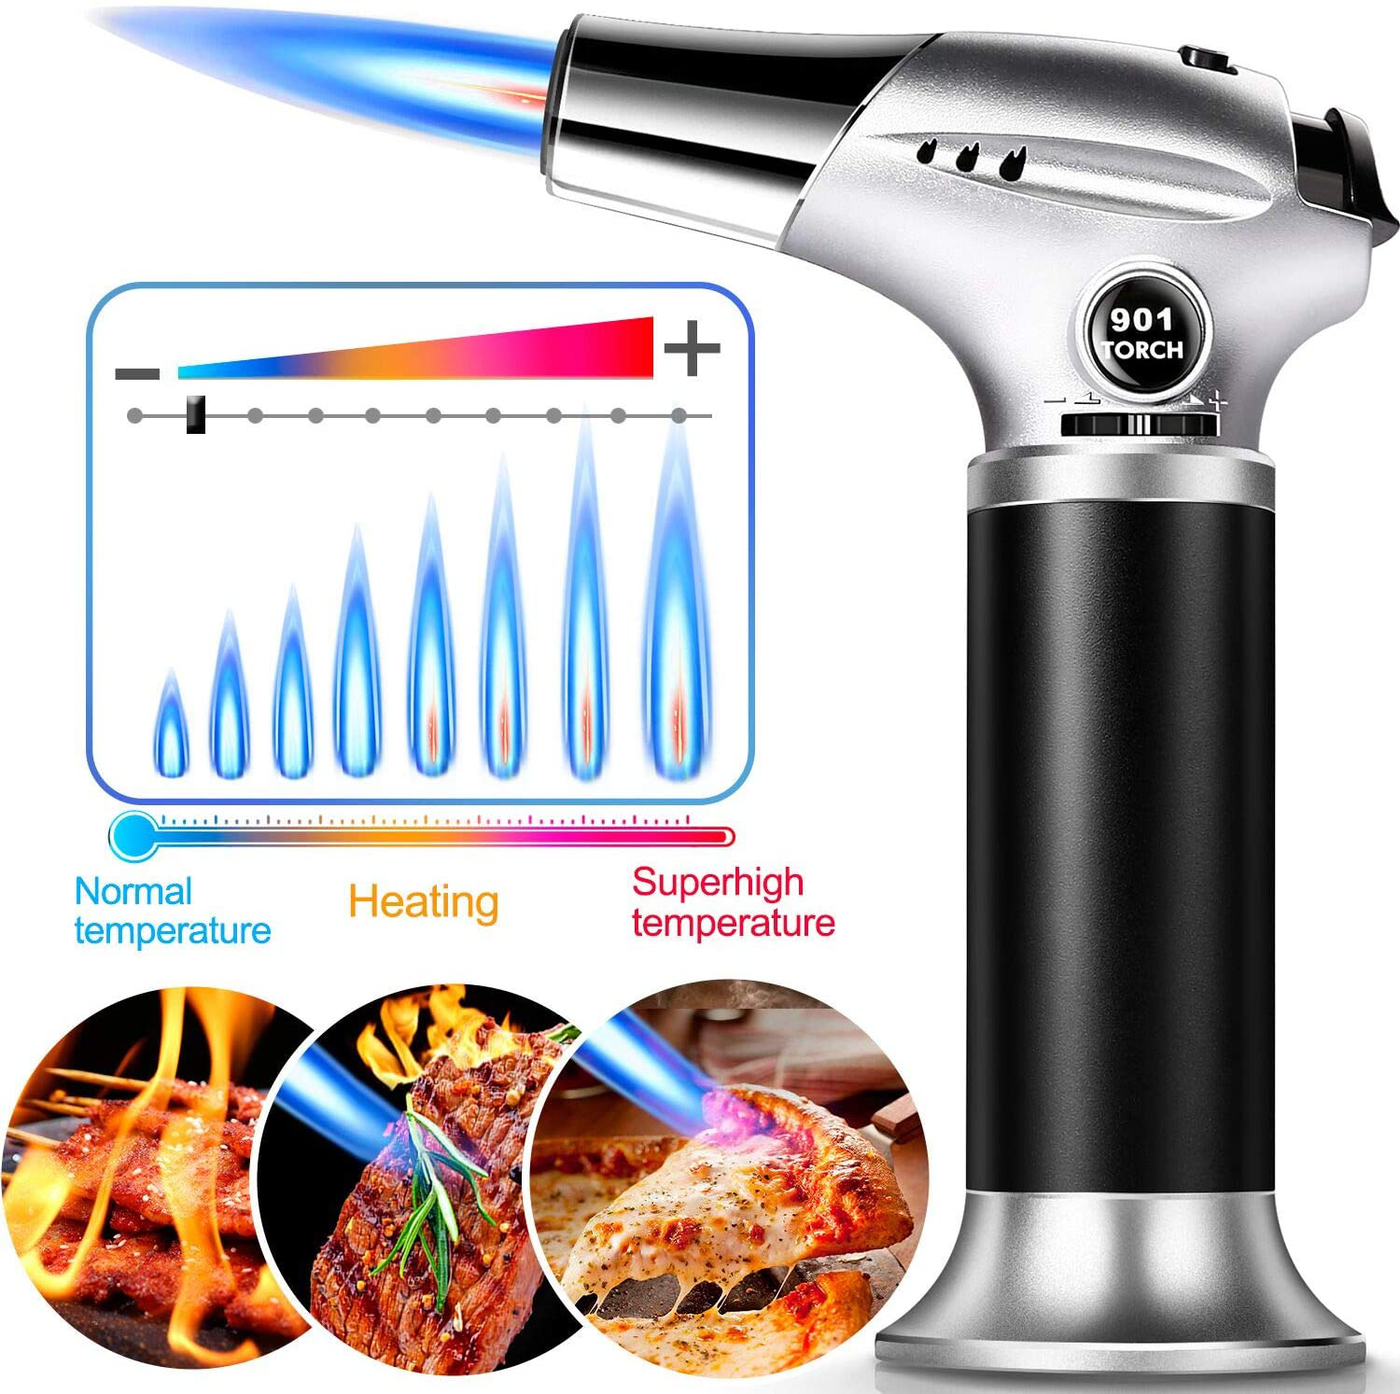 Culinary Butane Torch, Kitchen Refillable Butane Blow Torch with Safety Lock and Adjustable Flame for Crafts Cooking BBQ Baking Brulee Creme Desserts DIY Soldering (Butane Gas Not Included)